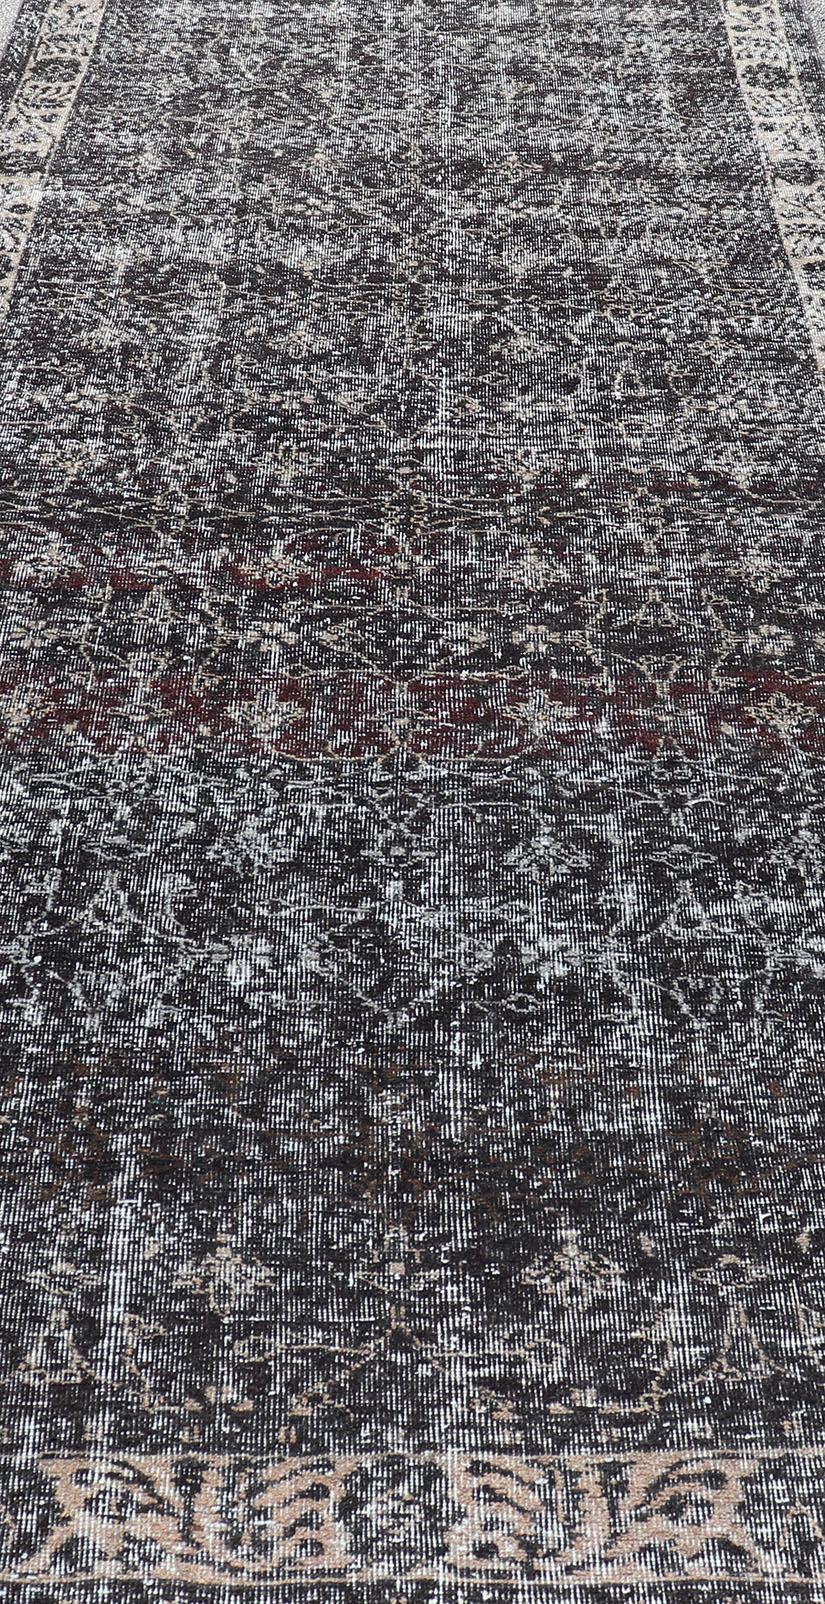 Over dyed in charcoal, cream & grays gallery oushak with all-over floral design.
Keivan Woven Arts / rug EN-P13612, country of origin / type: Turkey / Oushak, circa Mid-20th Century.

Measures: 4'10 x 12'6.